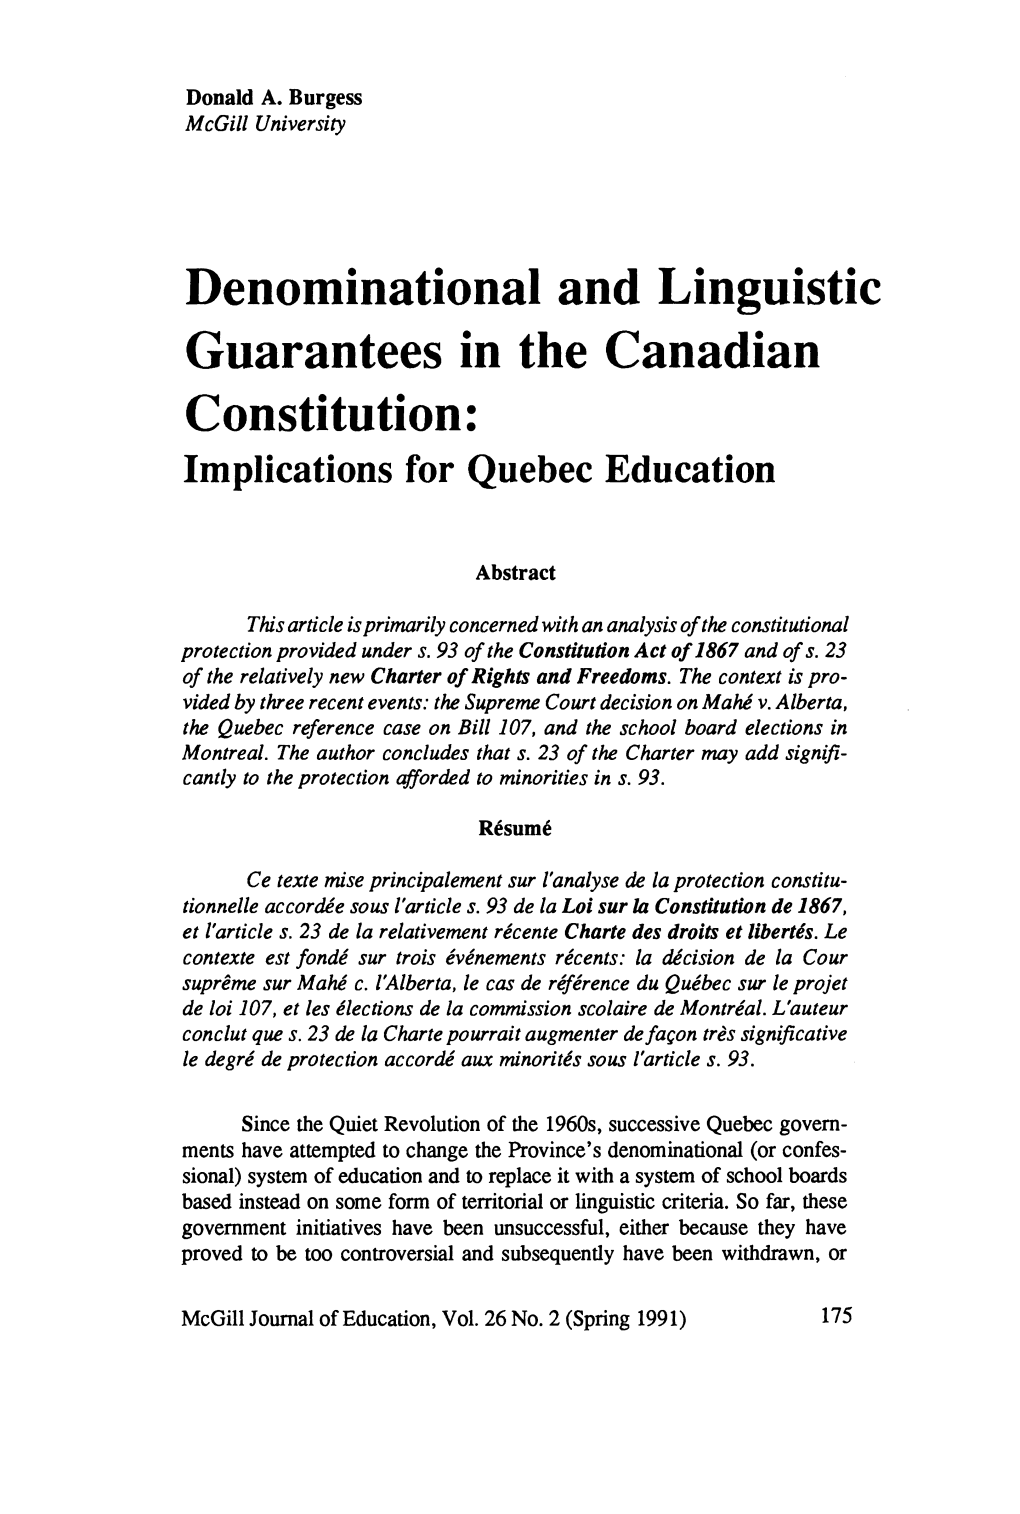 Denominational and Linguistic Guarantees in the Canadian Constitution: Implications for Quebec Education